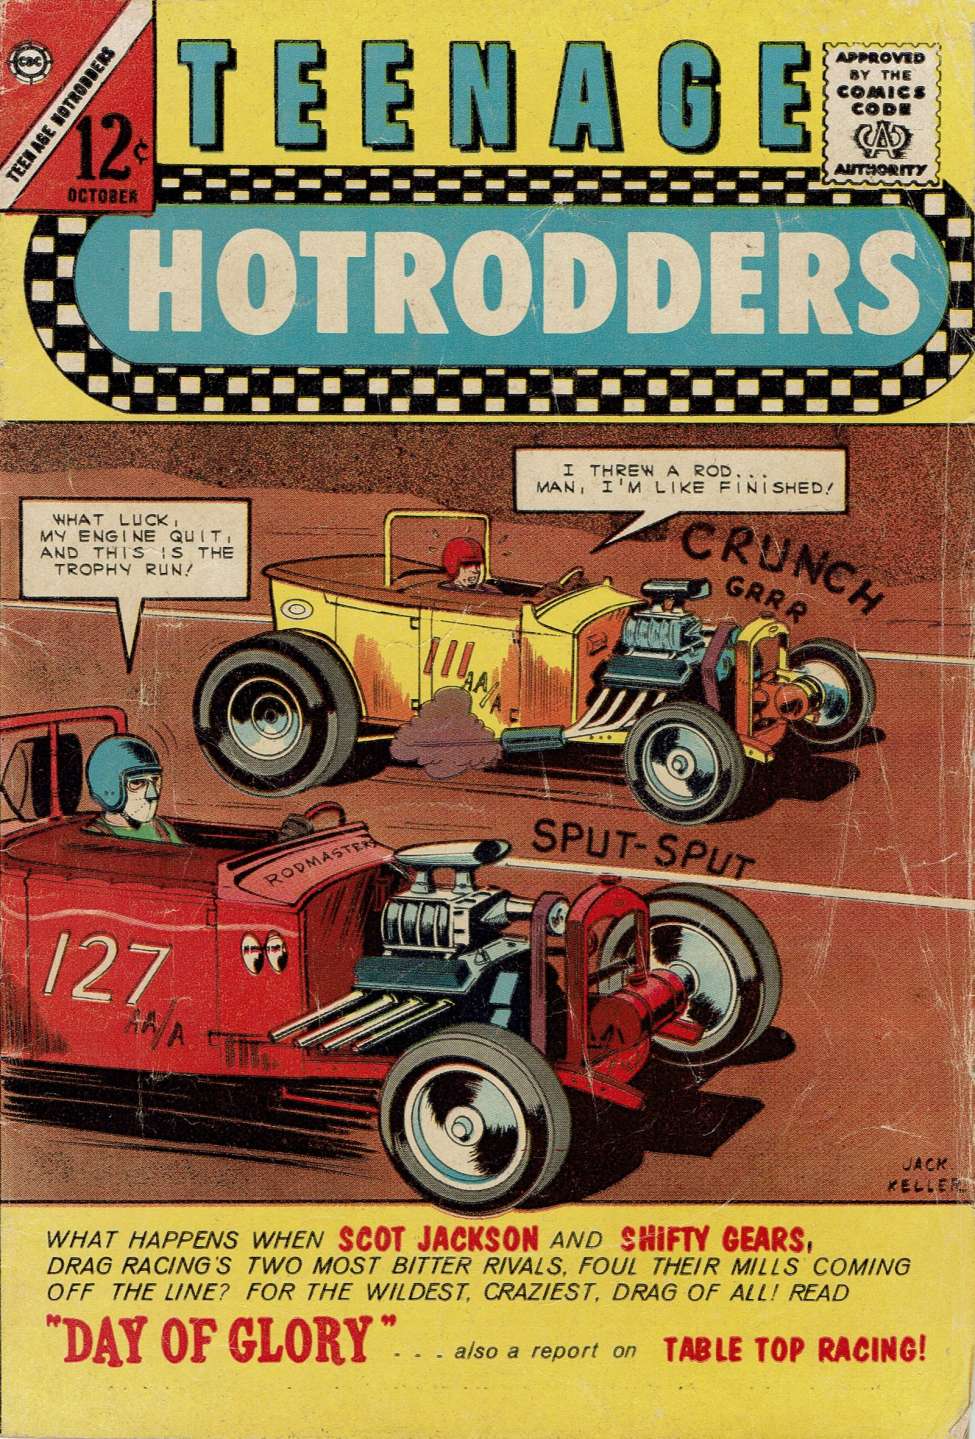 Book Cover For Teenage Hotrodders 9